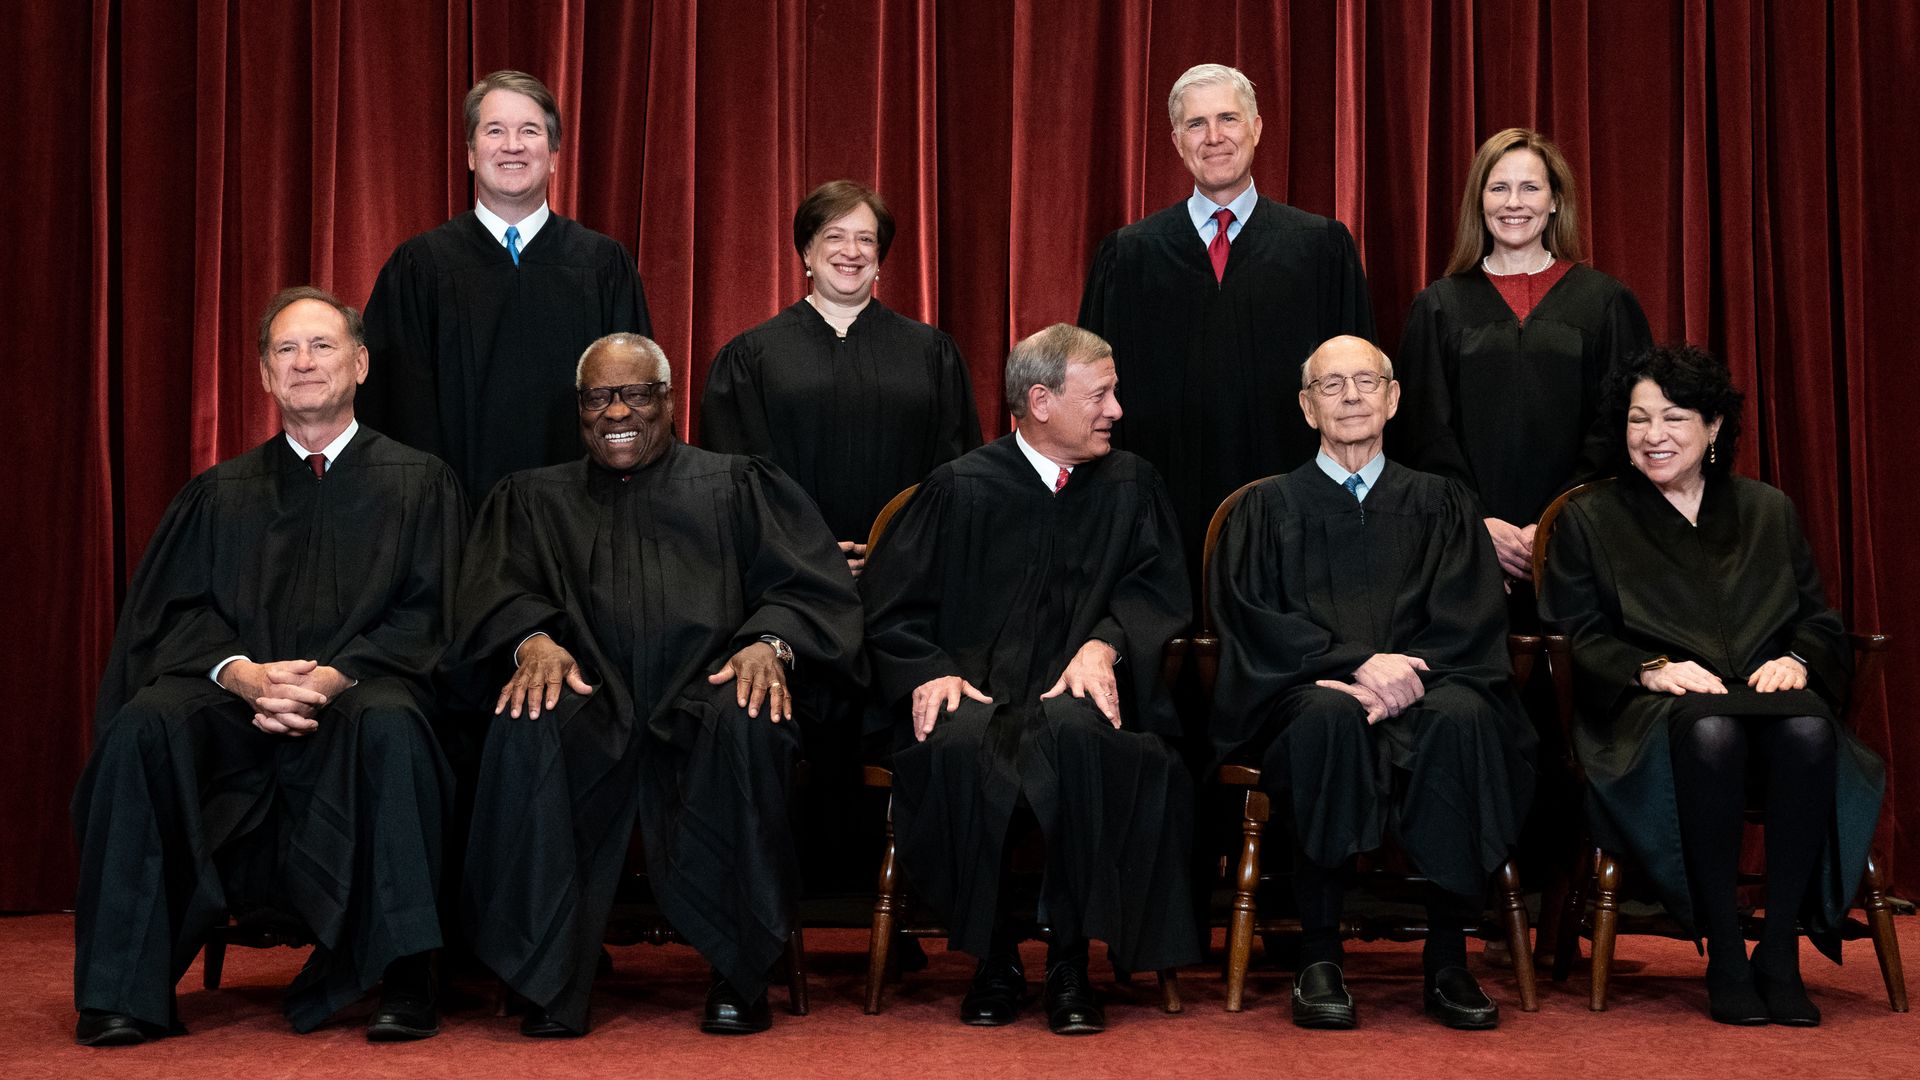 Picture of all nine Supreme Court justices